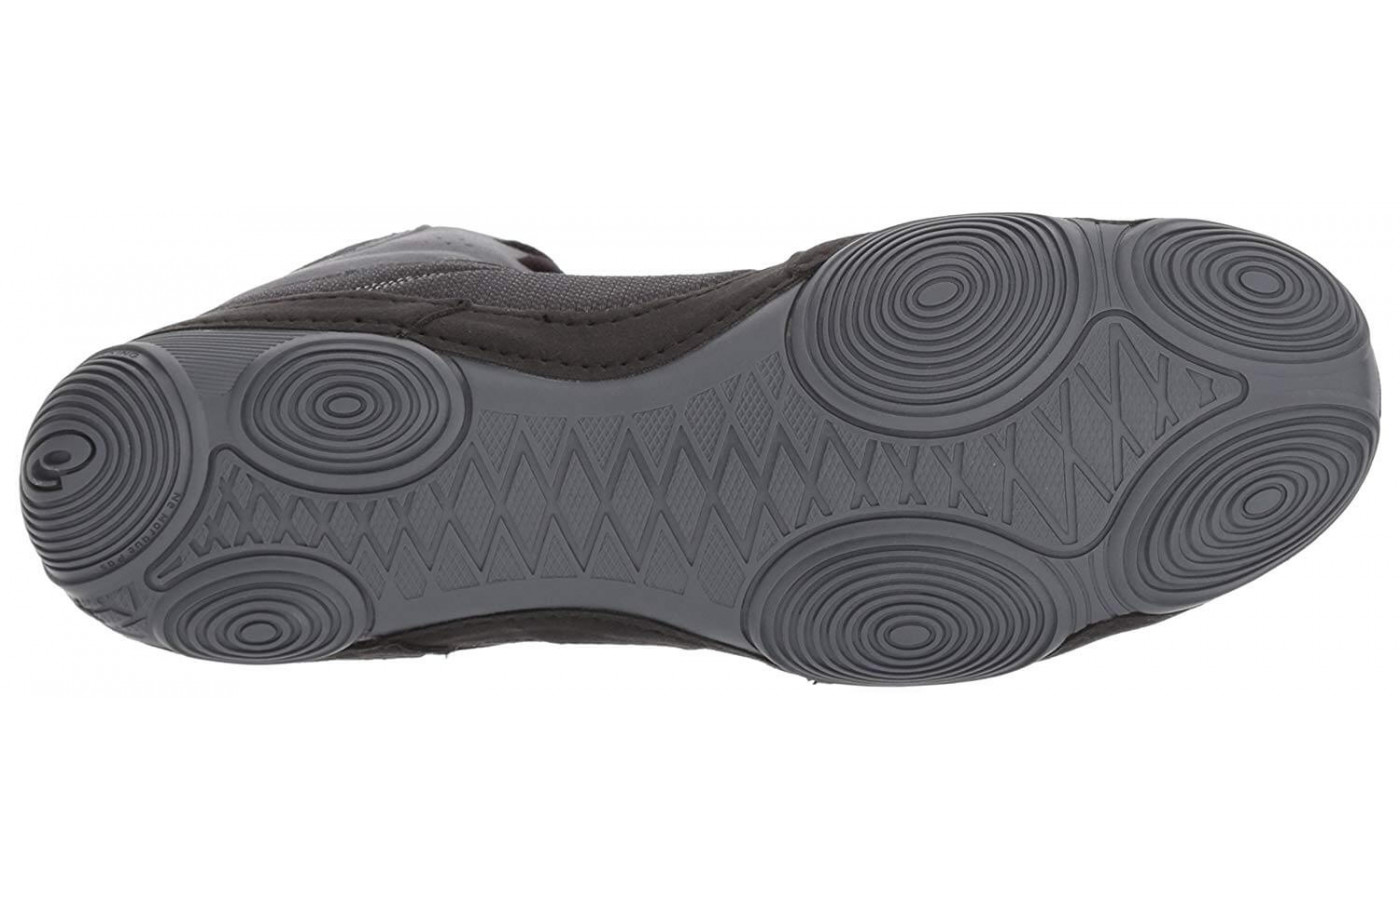 The Snapdown 2's outsole features Serradial Traction Pods